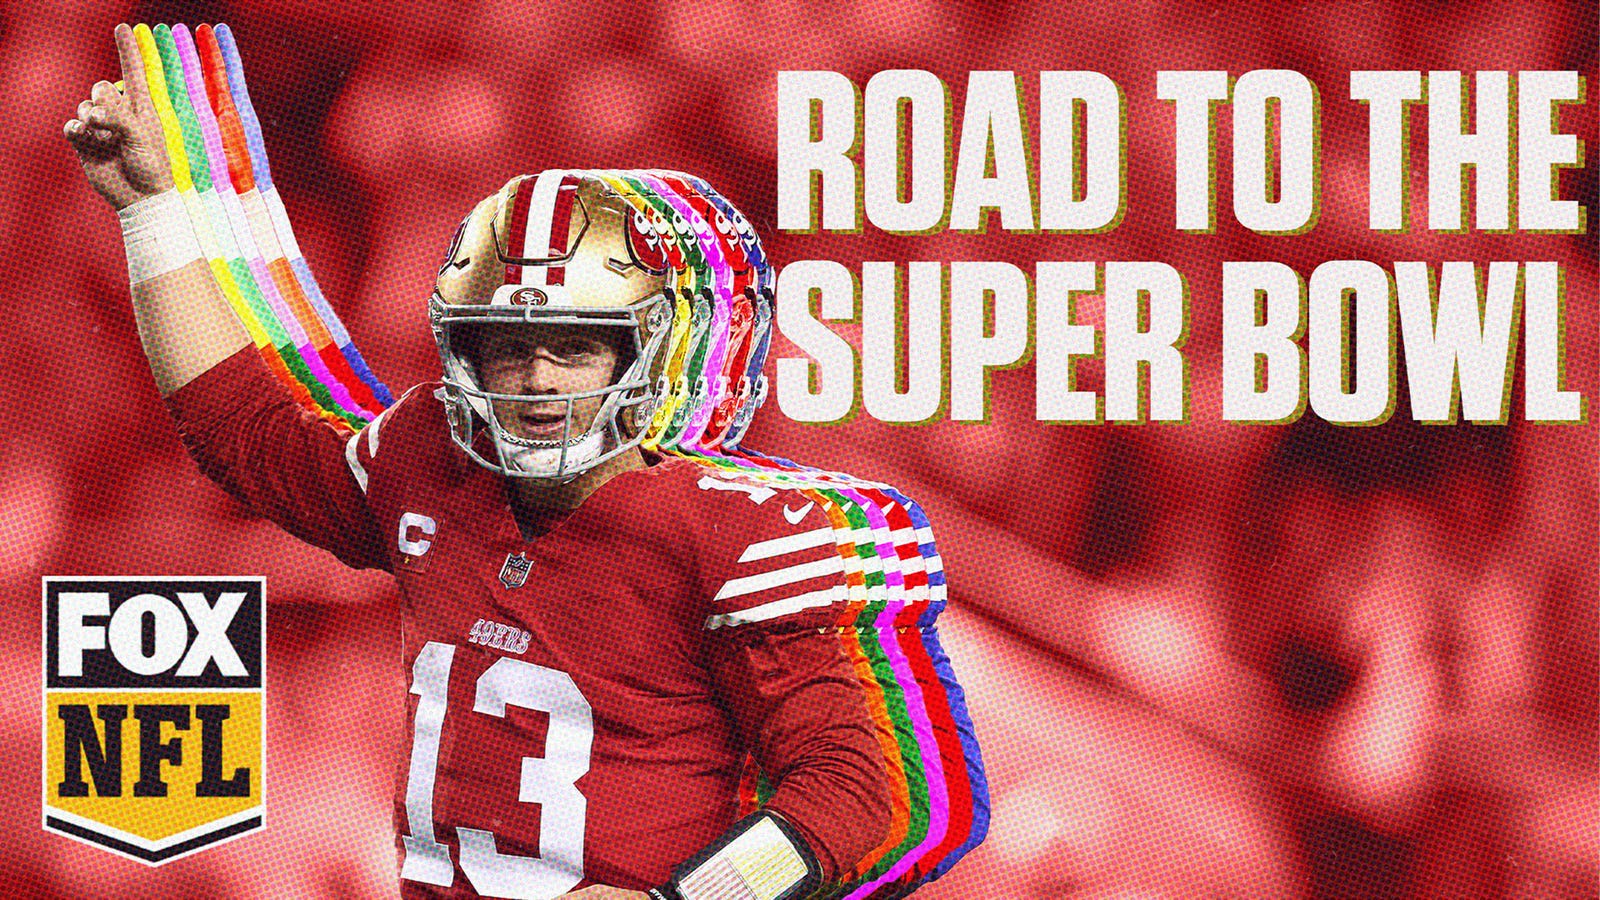 The San Francisco 49ers' inspirational road to the Super Bowl